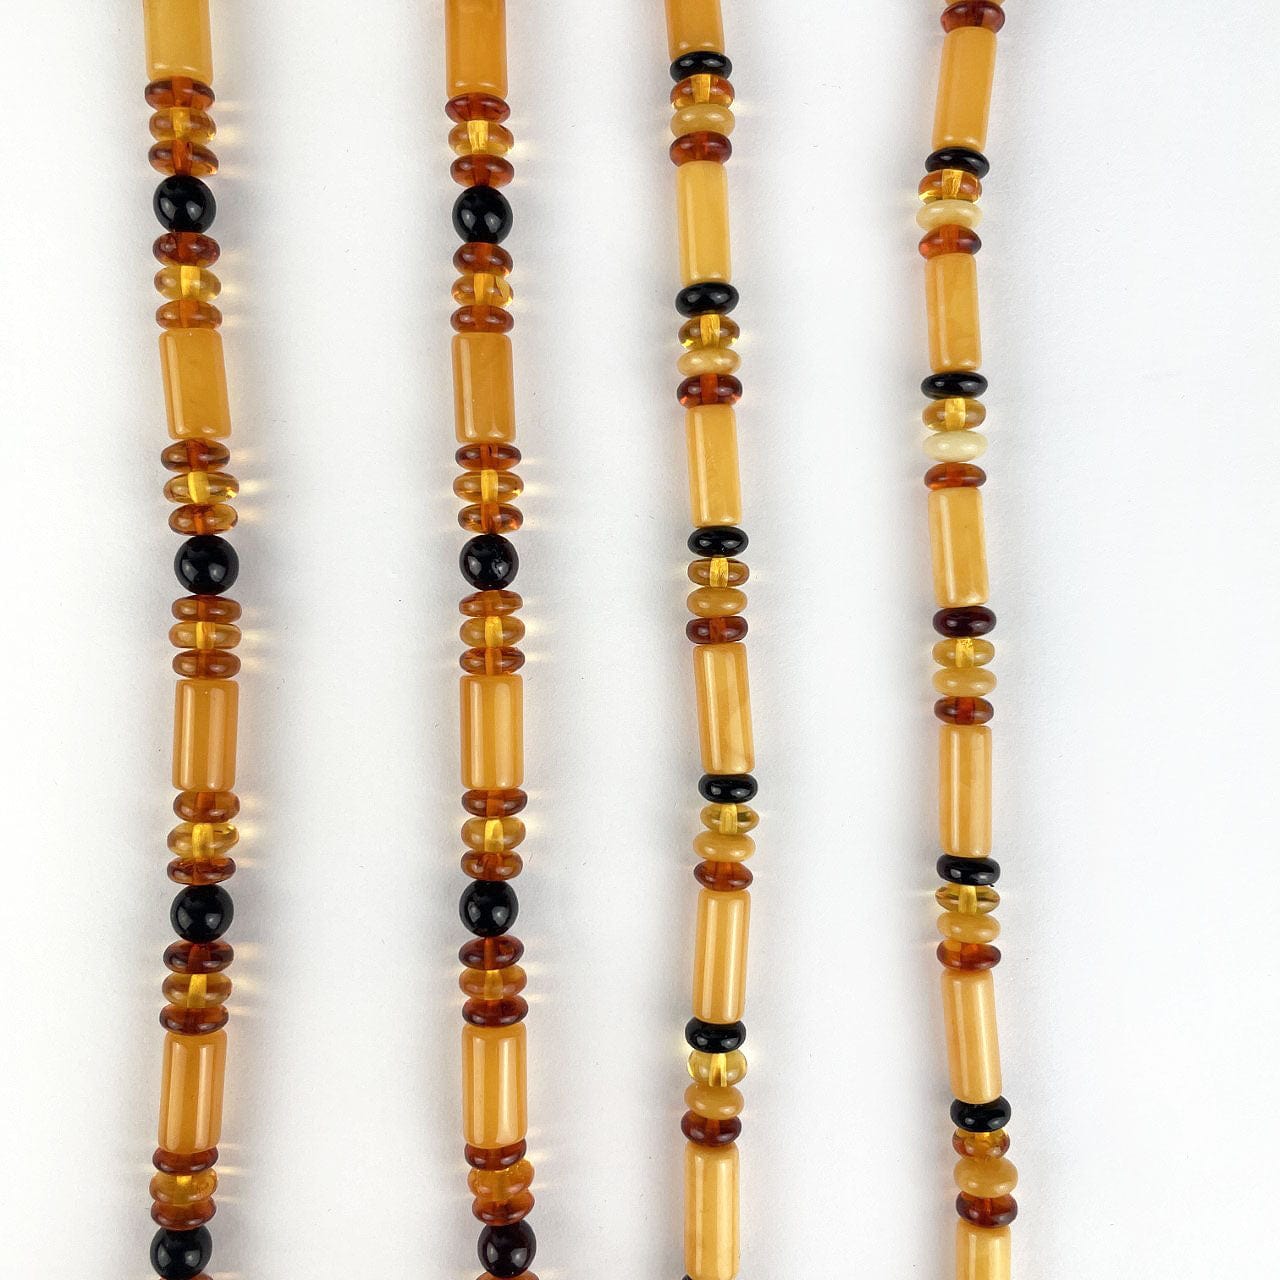 Amber Beaded Necklace with Assorted size and color of Beads up close to see detail